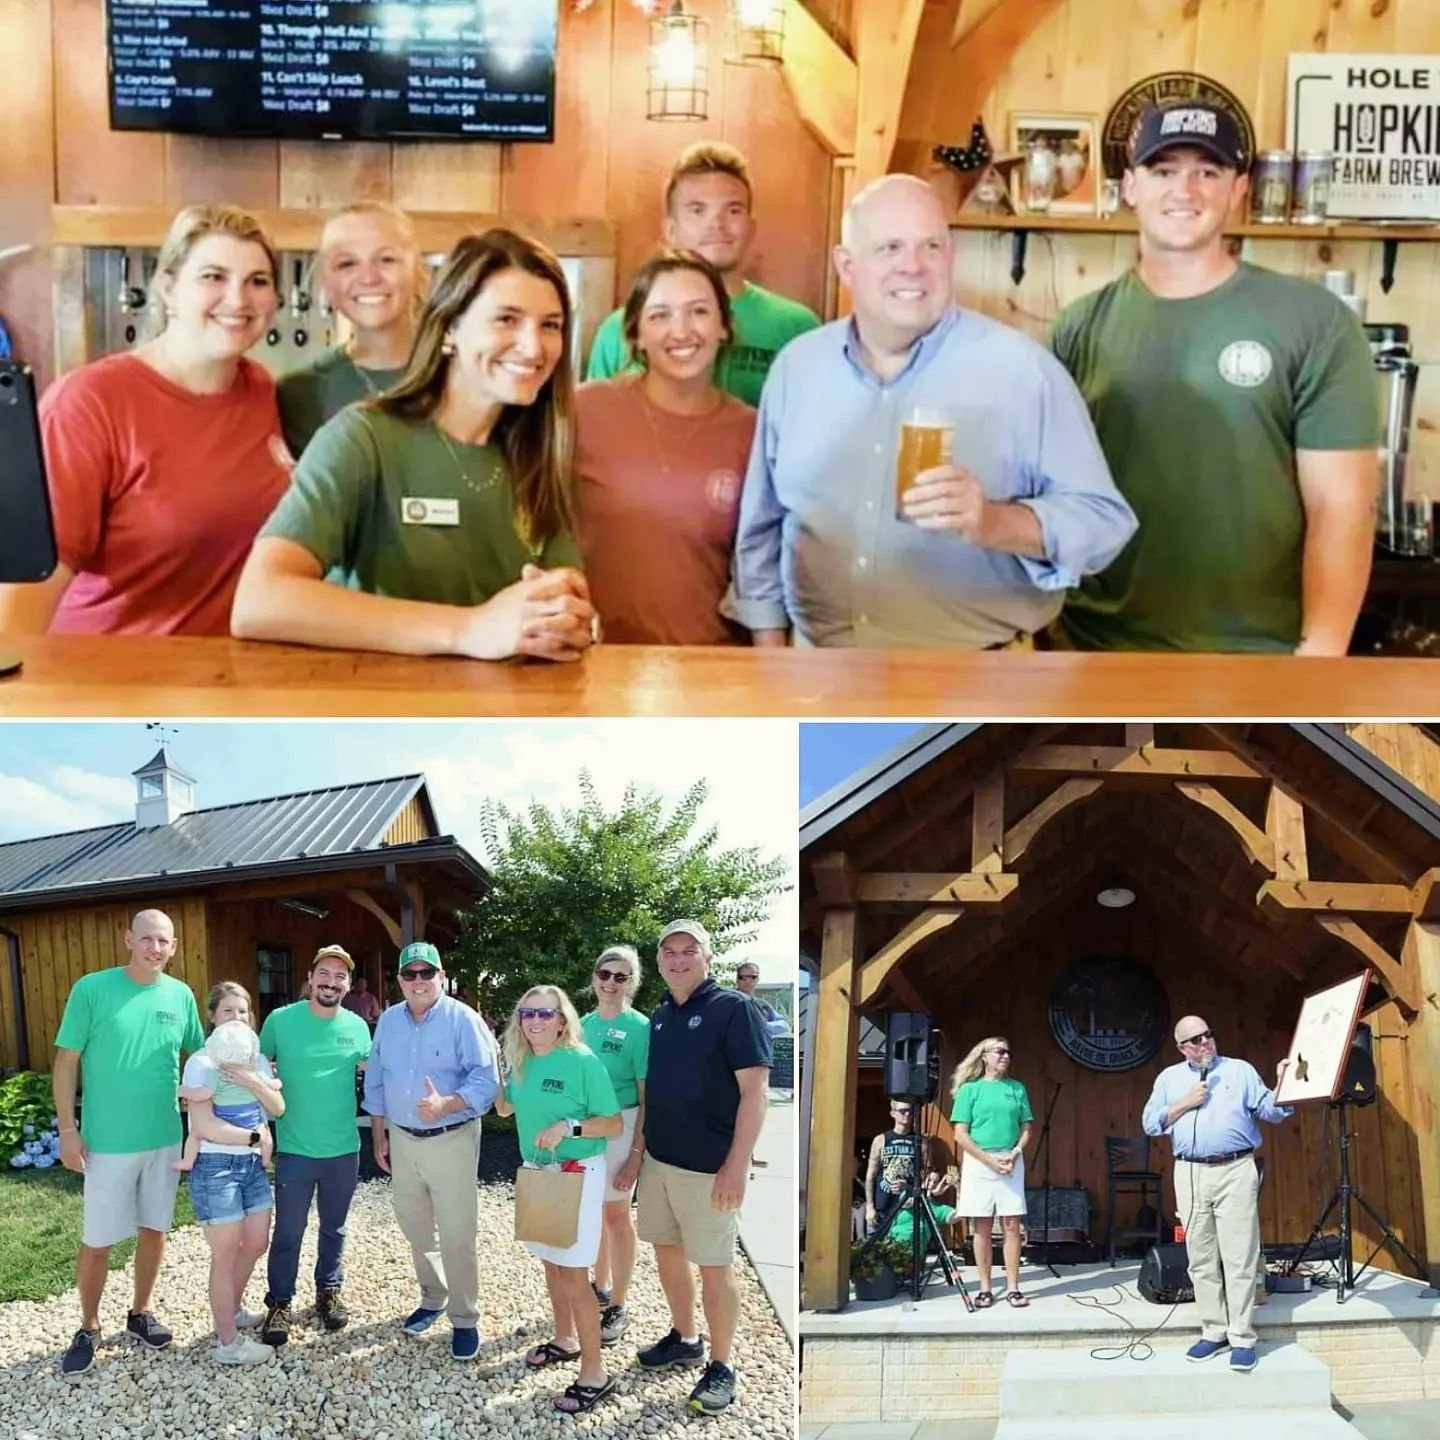 Look who's coming to Hopkins Farm Brewery tomorrow for Lagerfest! Here are a few pictures from his last visit in July 2022. Expected arrival time is mid afternoon!